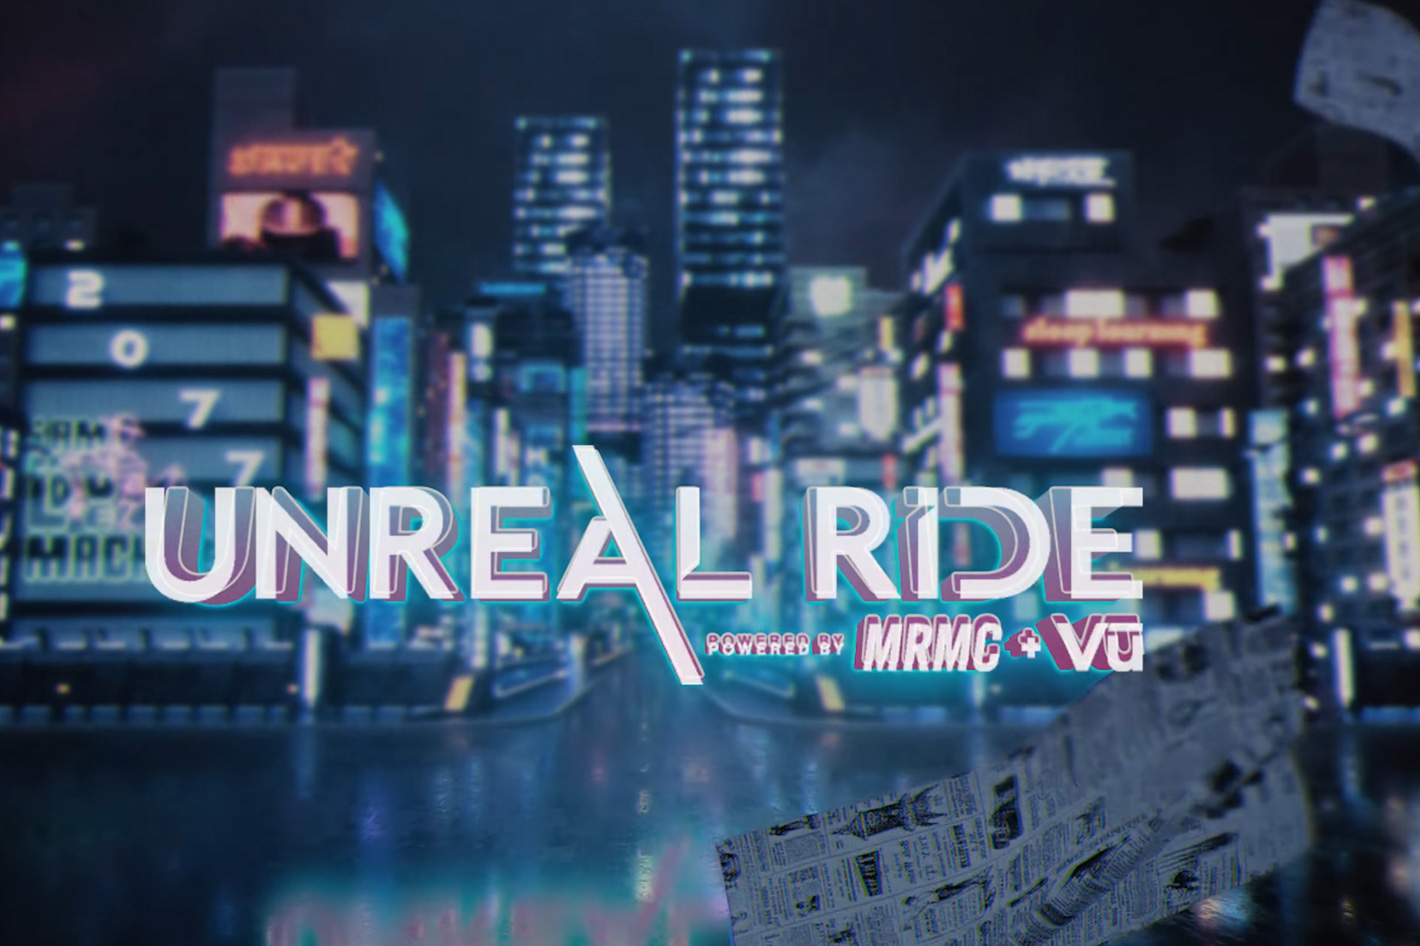 Futuristic motorcycle ride returns to NAB with Vū and MRMC